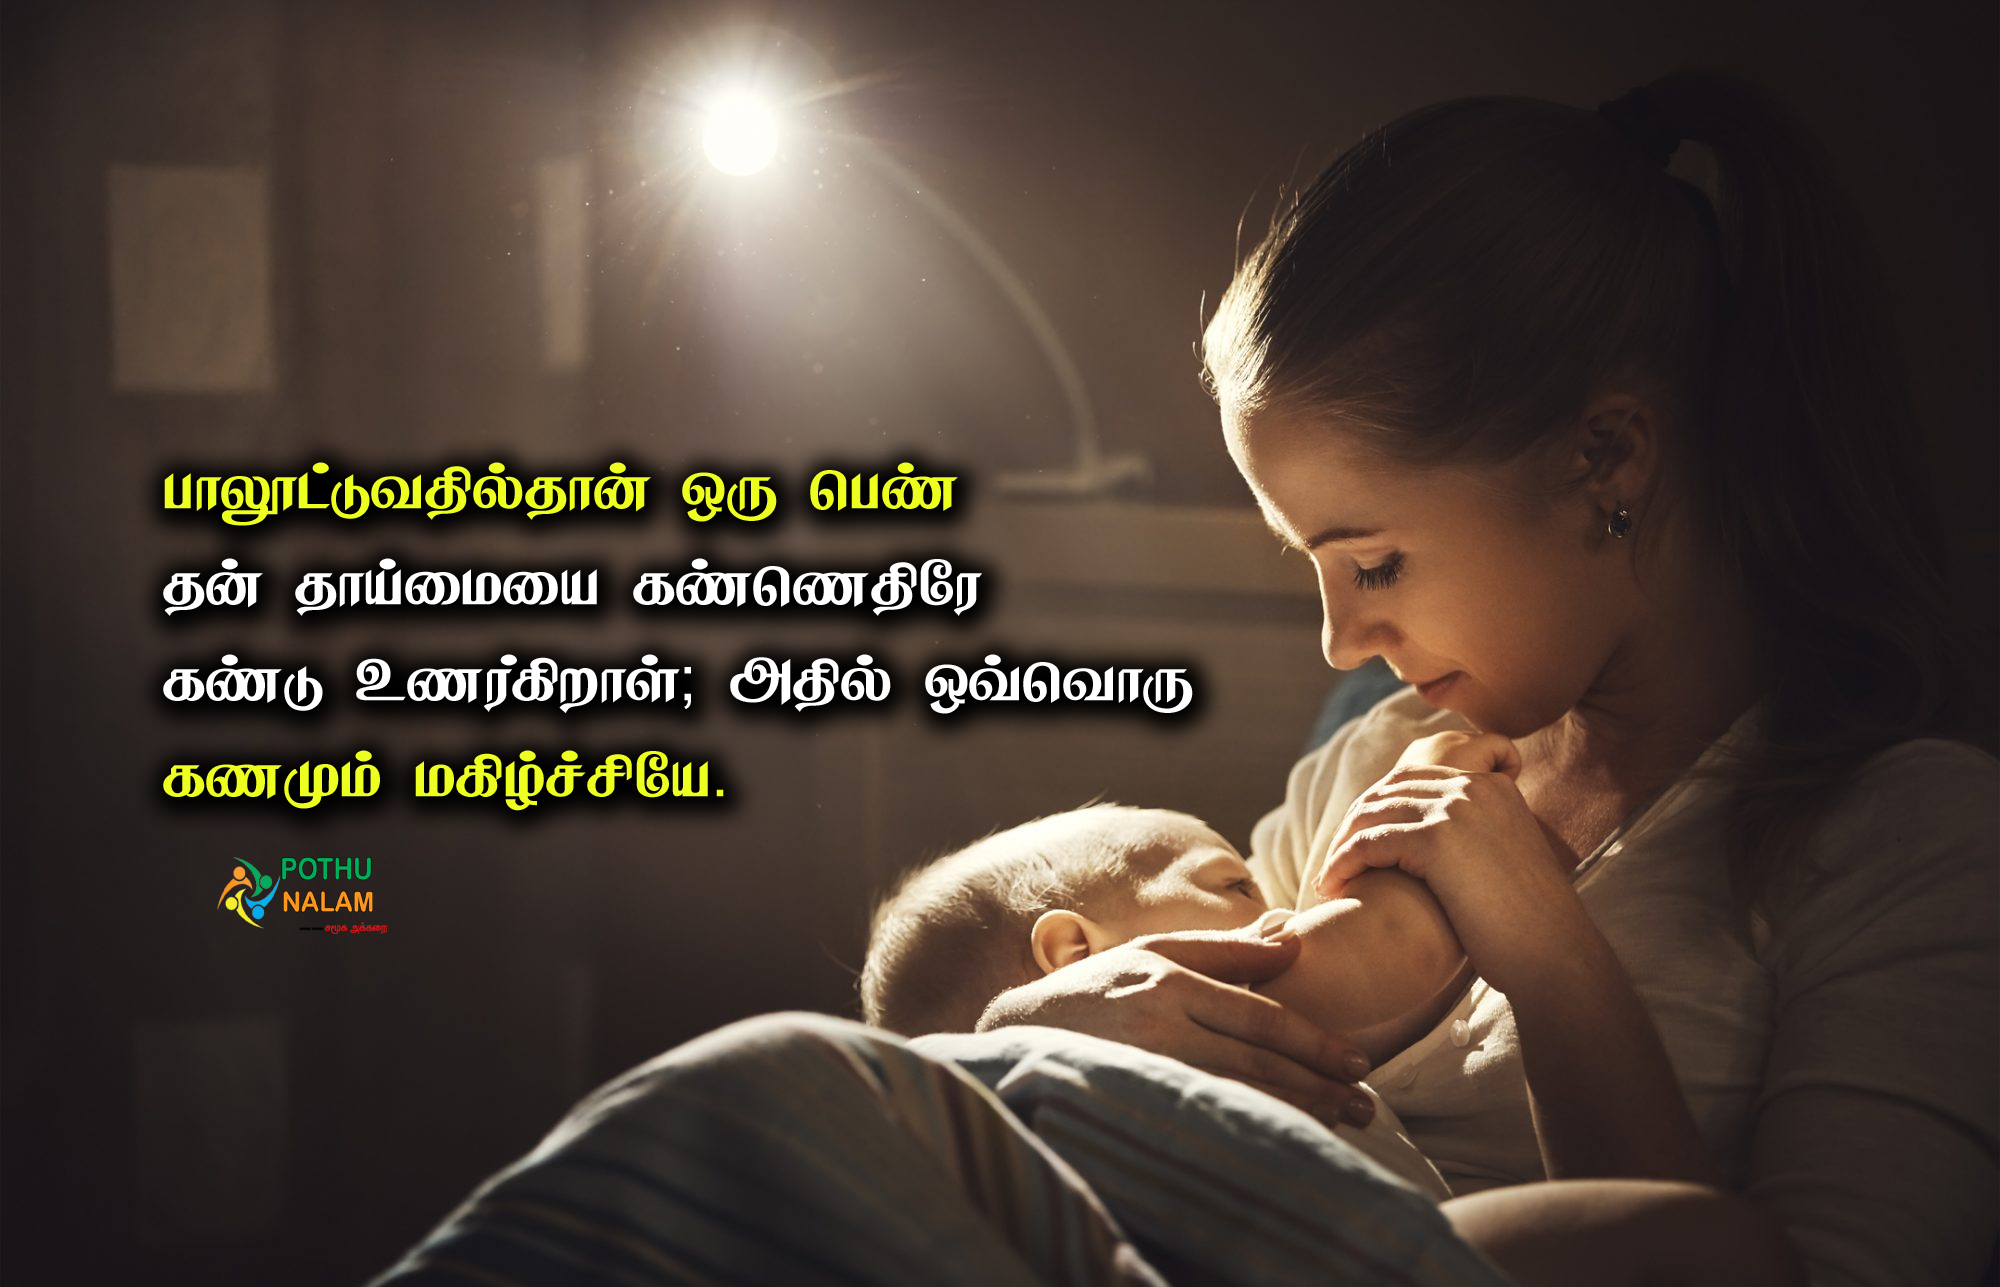 Breastfeeding Quotes in Tamil